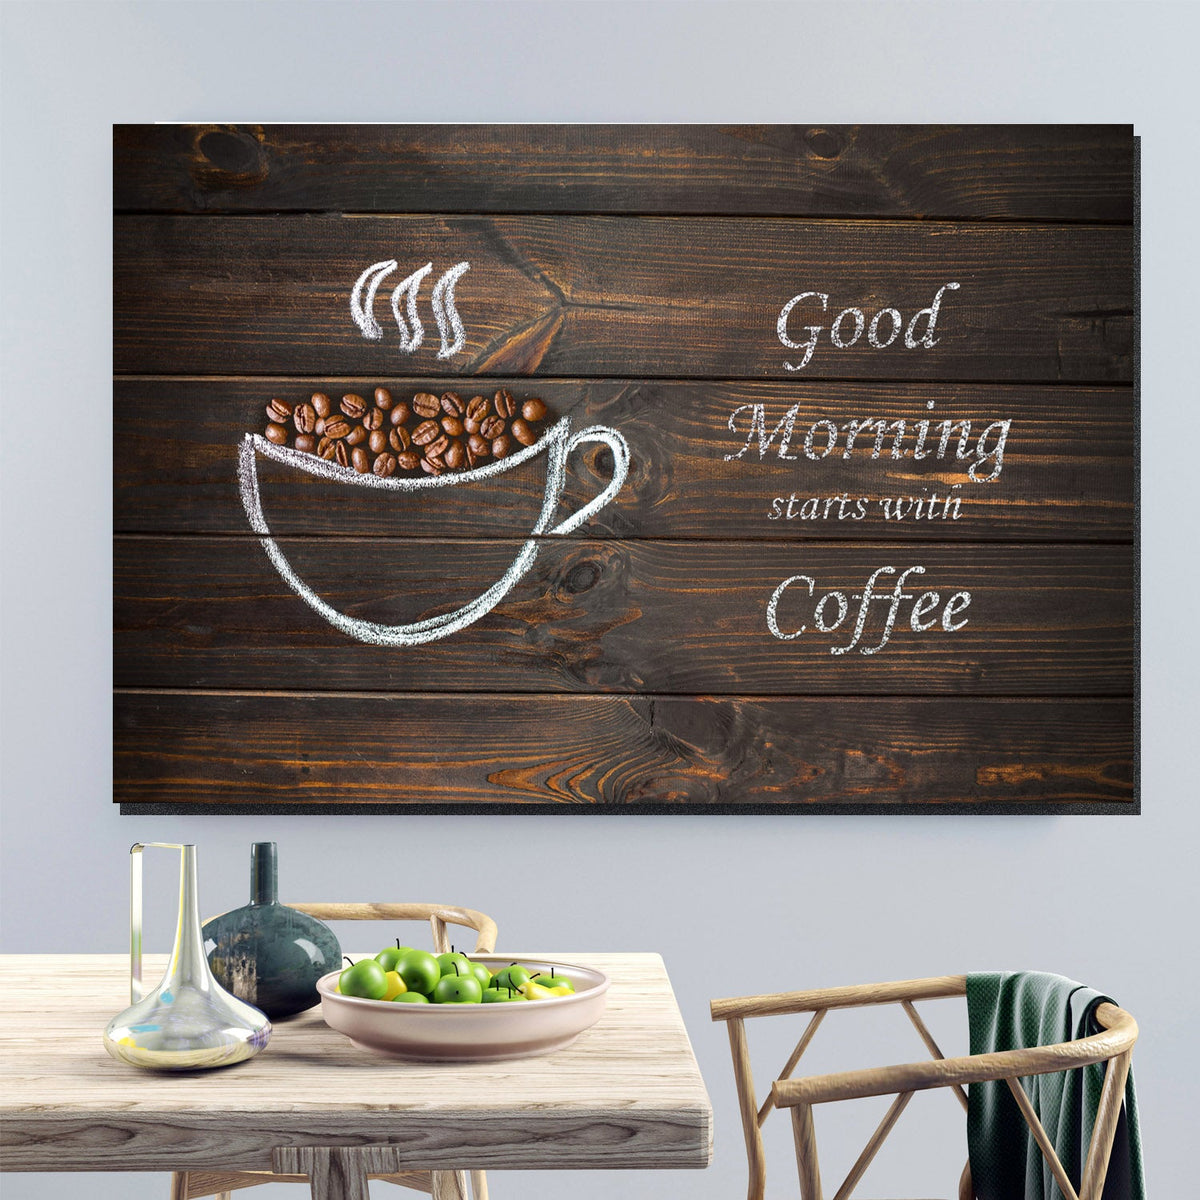 https://cdn.shopify.com/s/files/1/0387/9986/8044/products/GoodMorningStartswithCoffeeCanvasArtprintStretched-2.jpg